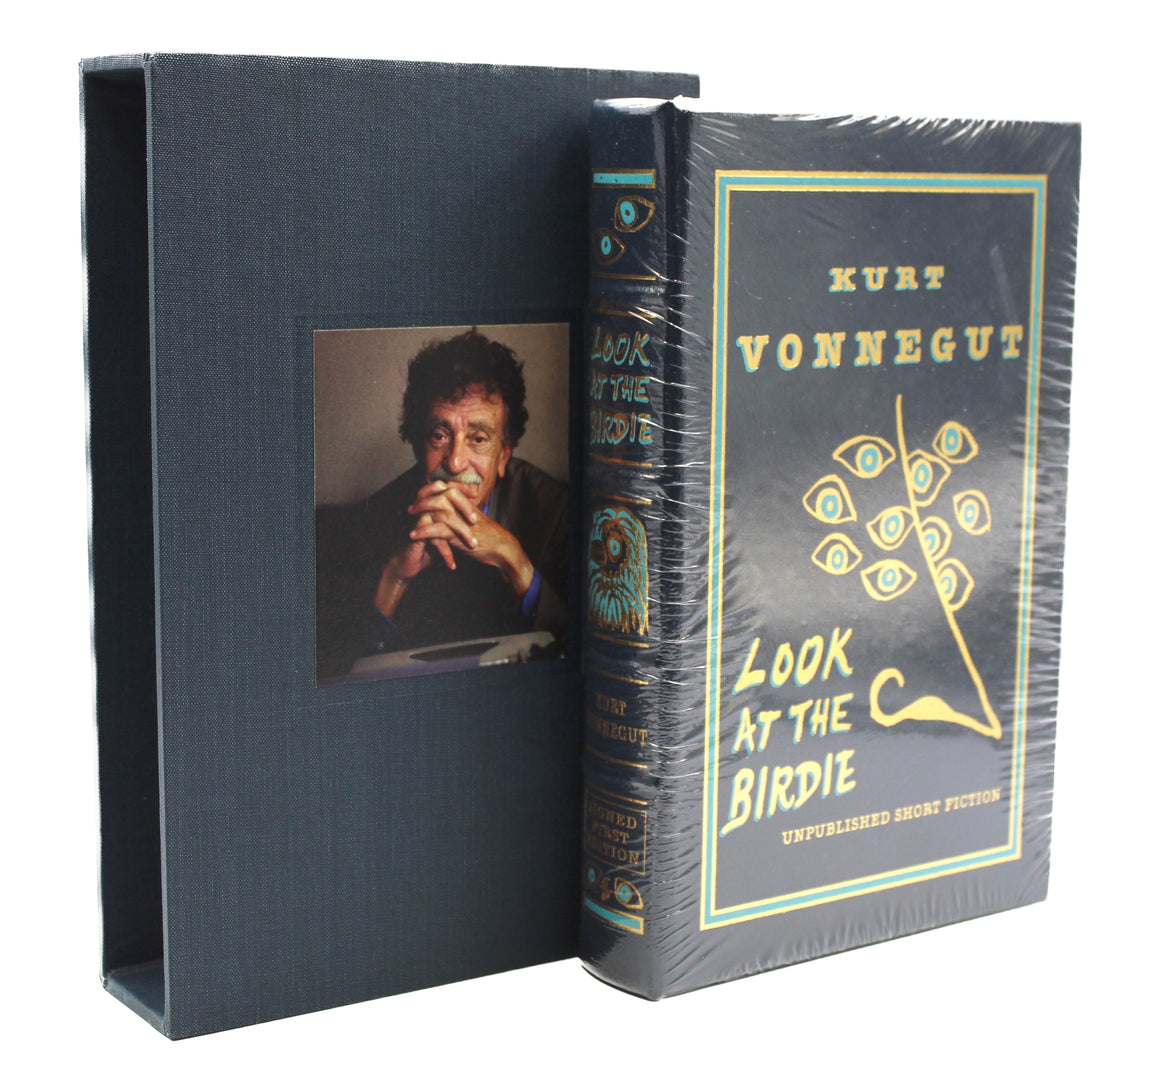 The novel and it's slipcase, standing slightly staggered next to eachother. The slipcase is placed behind the novel to the left, featuring a color portrait photo of Kurt Vonnegut. The novel is to the right, still shrinkwrapped. 